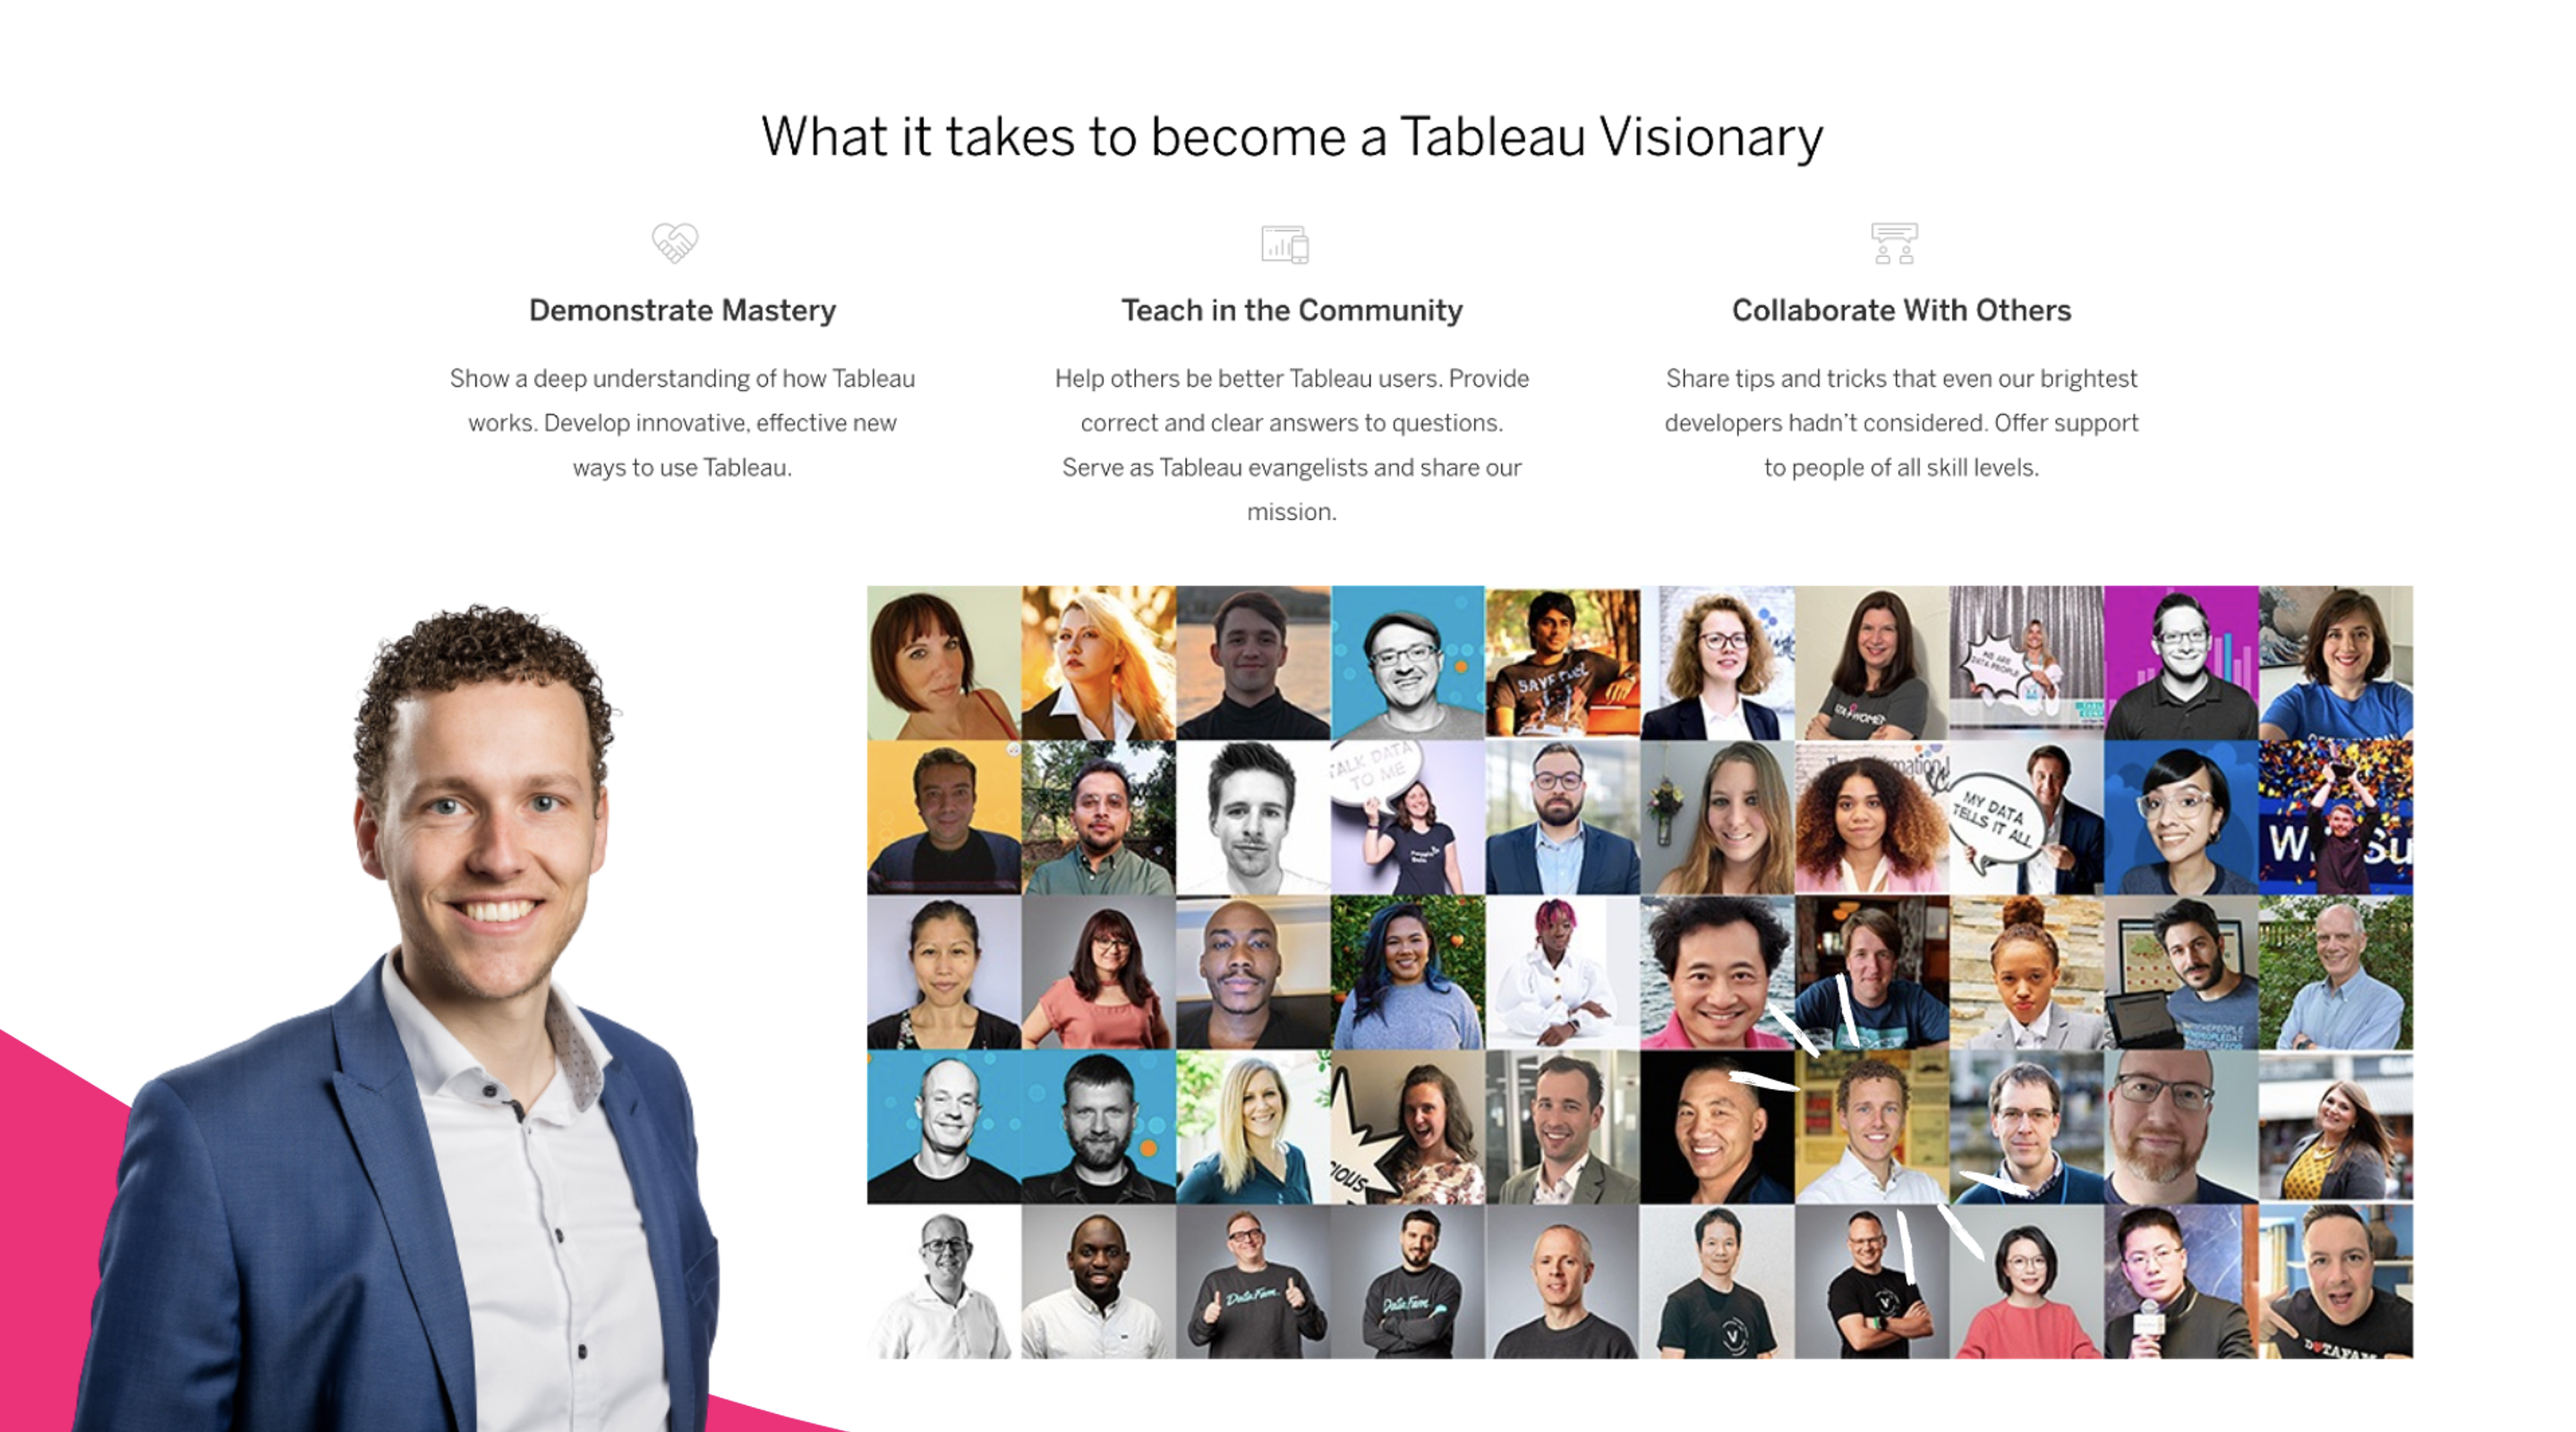 Merlijn Buit selected as Tableau Visionary for the fifth time! Community Tableau Analytics